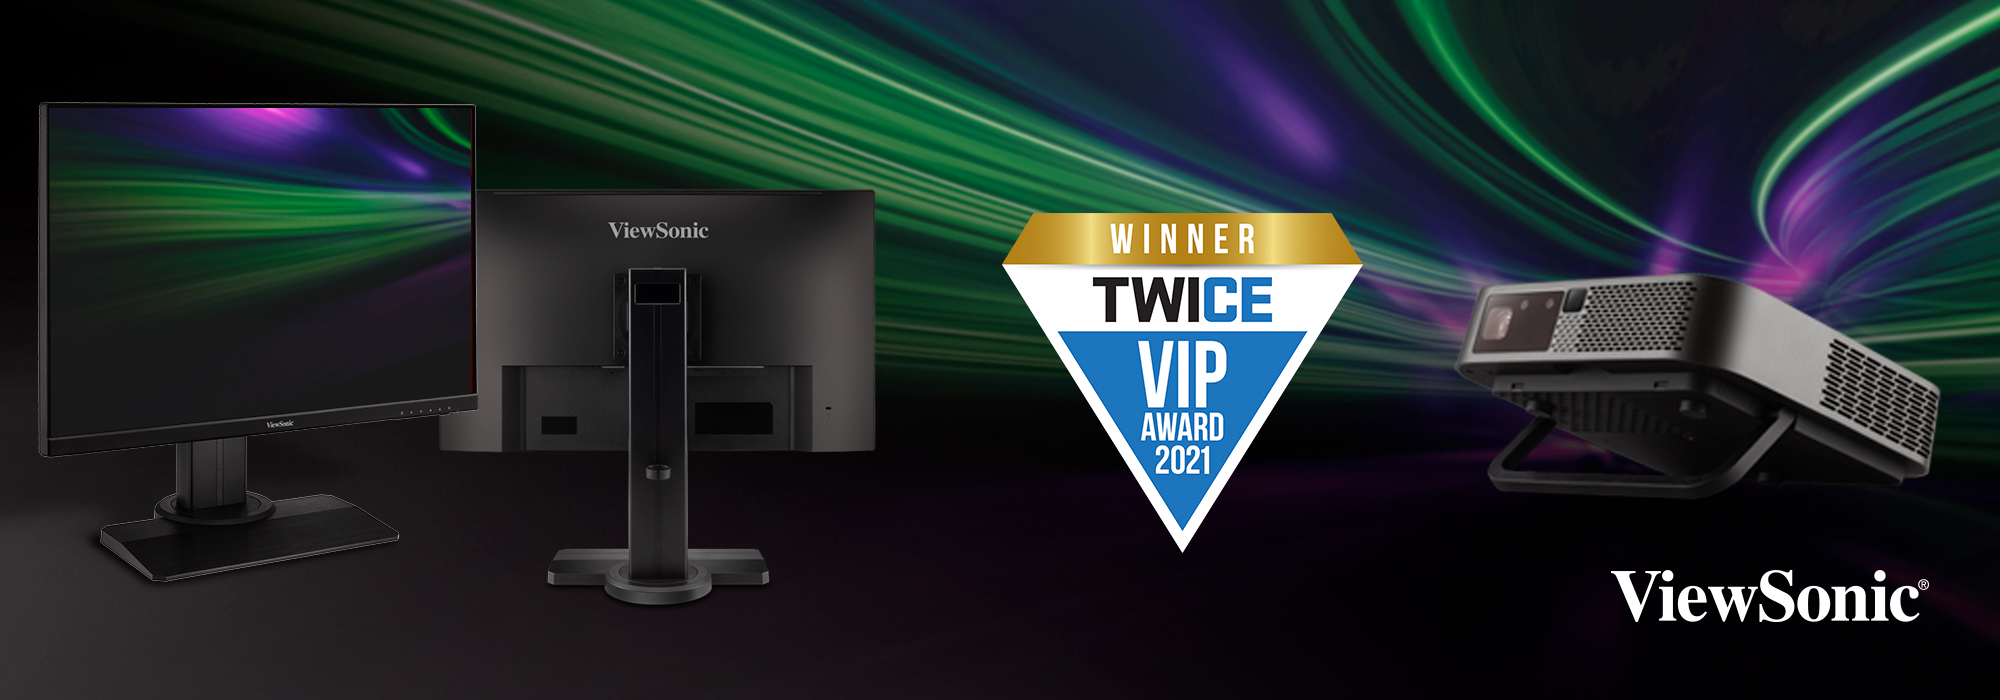 The ViewSonic XG2705-2K and M2e Products Honored with a 2021 TWICE VIP Award